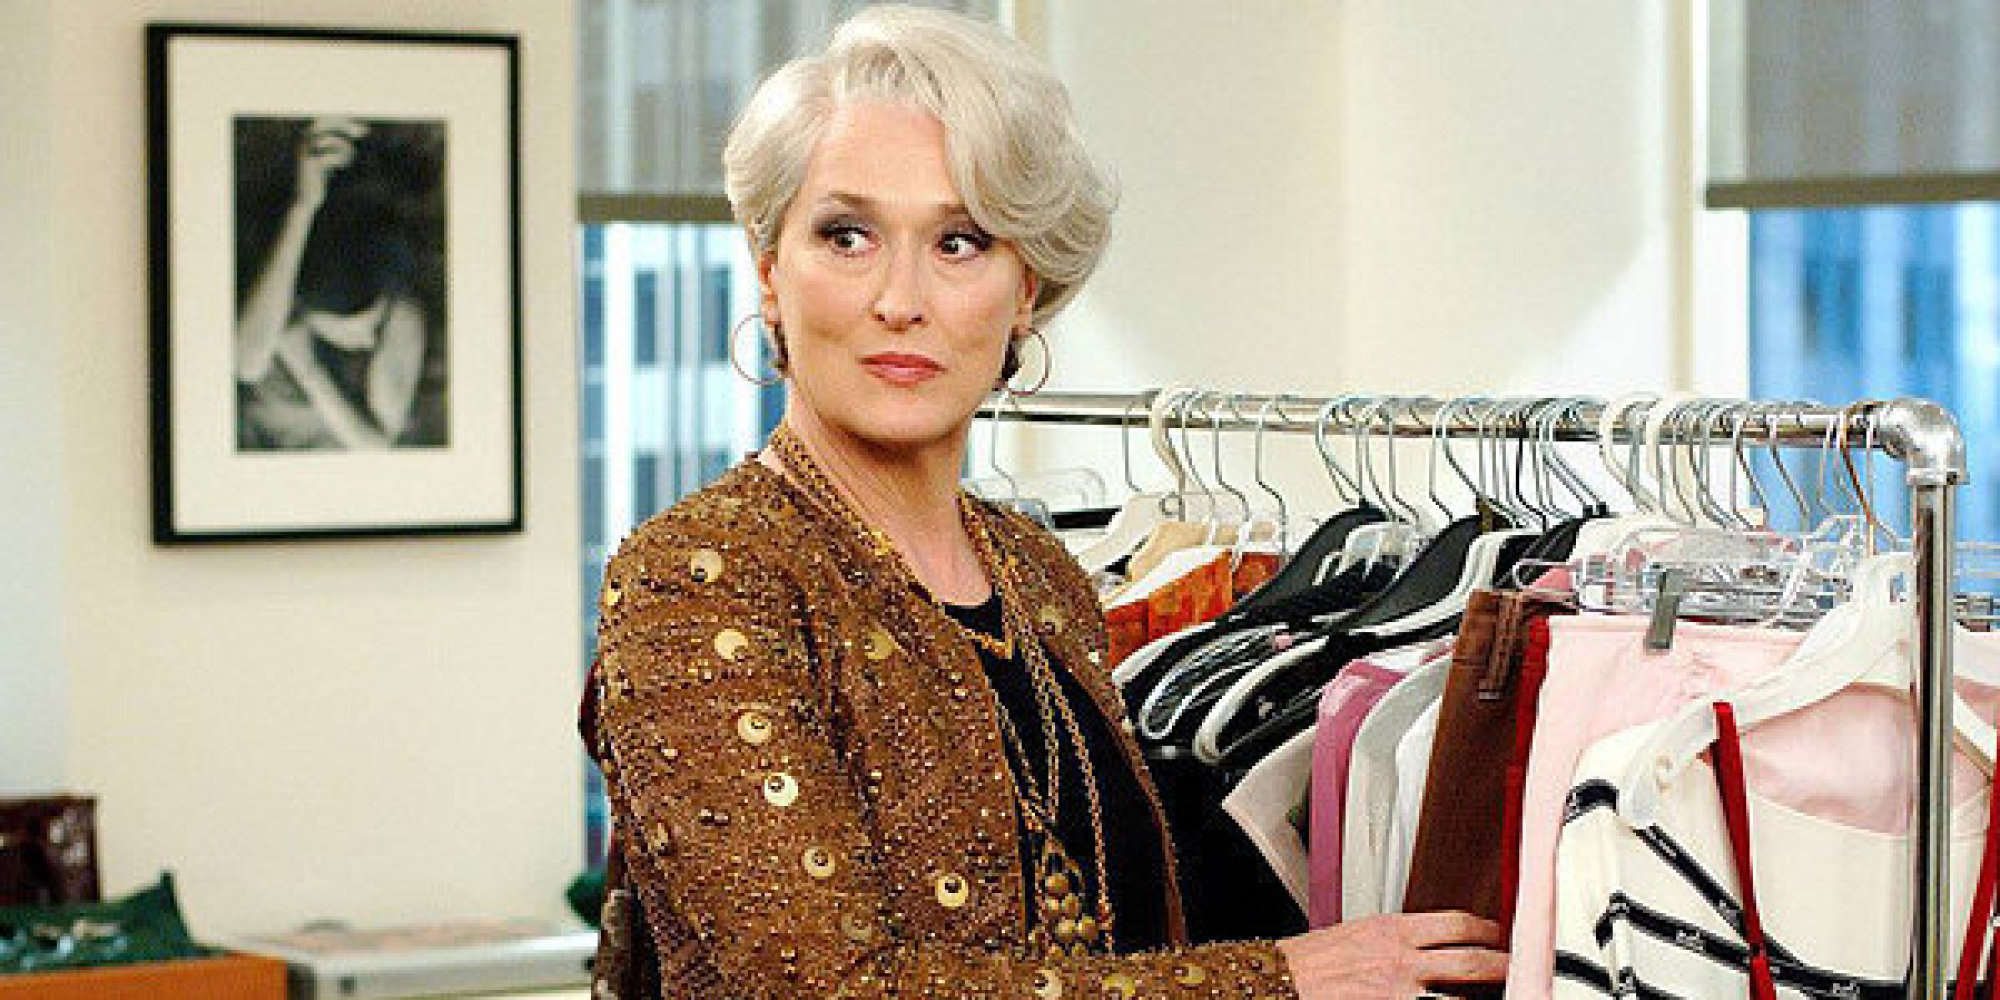 10 Of The Most Stylish Moms In Movies (PHOTOS)